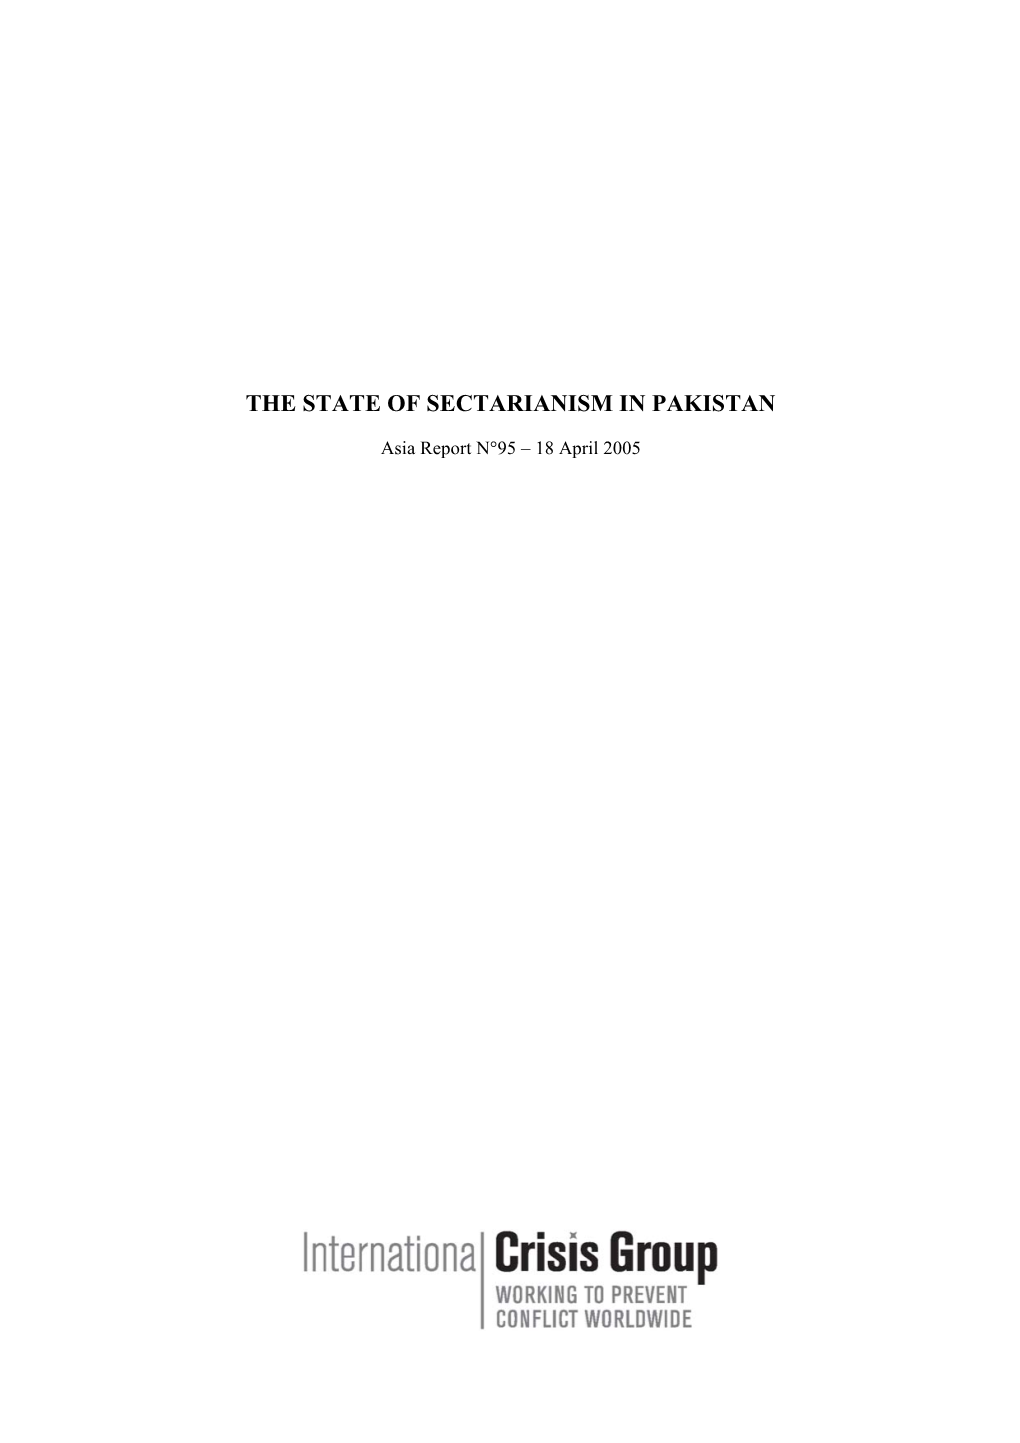 Asia Report, Nr. 95: the State of Sectarianism in Pakistan